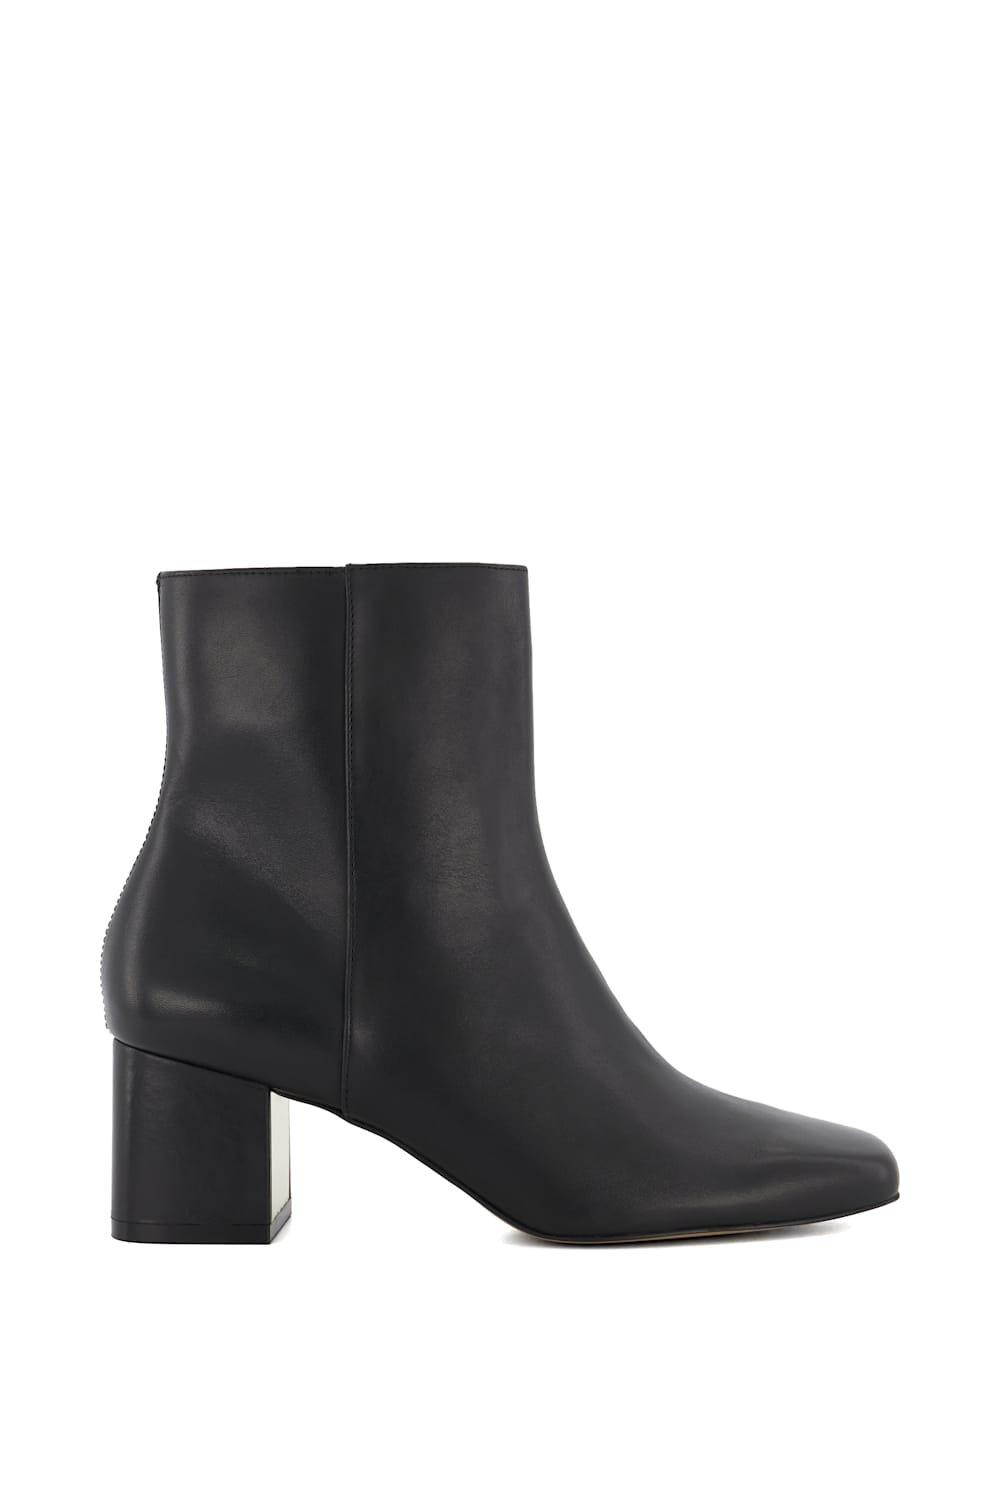 Boots | 'Onsen' Leather Smart Boots | Dune London